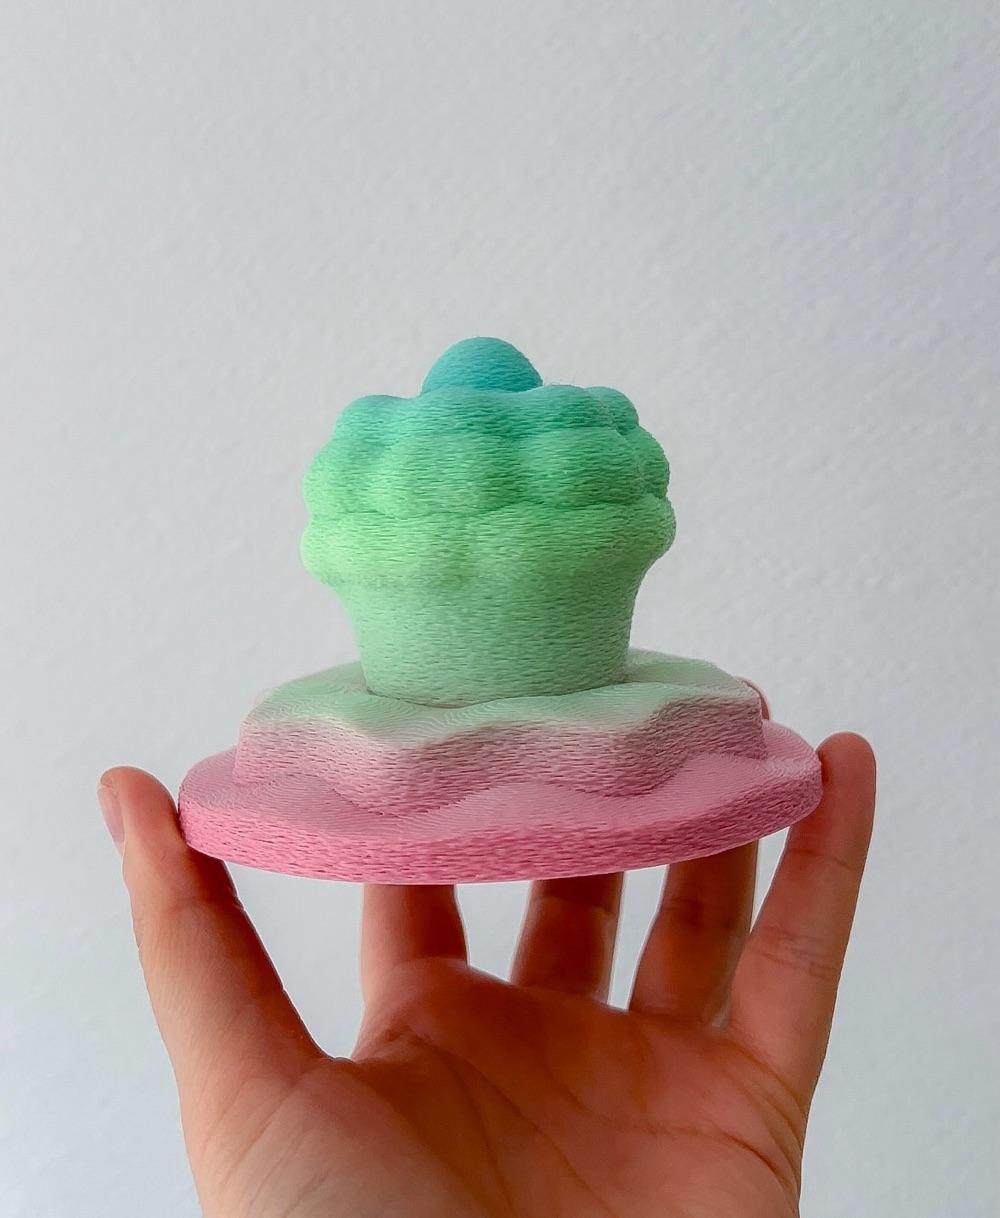 Sweettooth Cupcake - Fuzzy skin!
Isanmate rainbow filament.  - 3d model